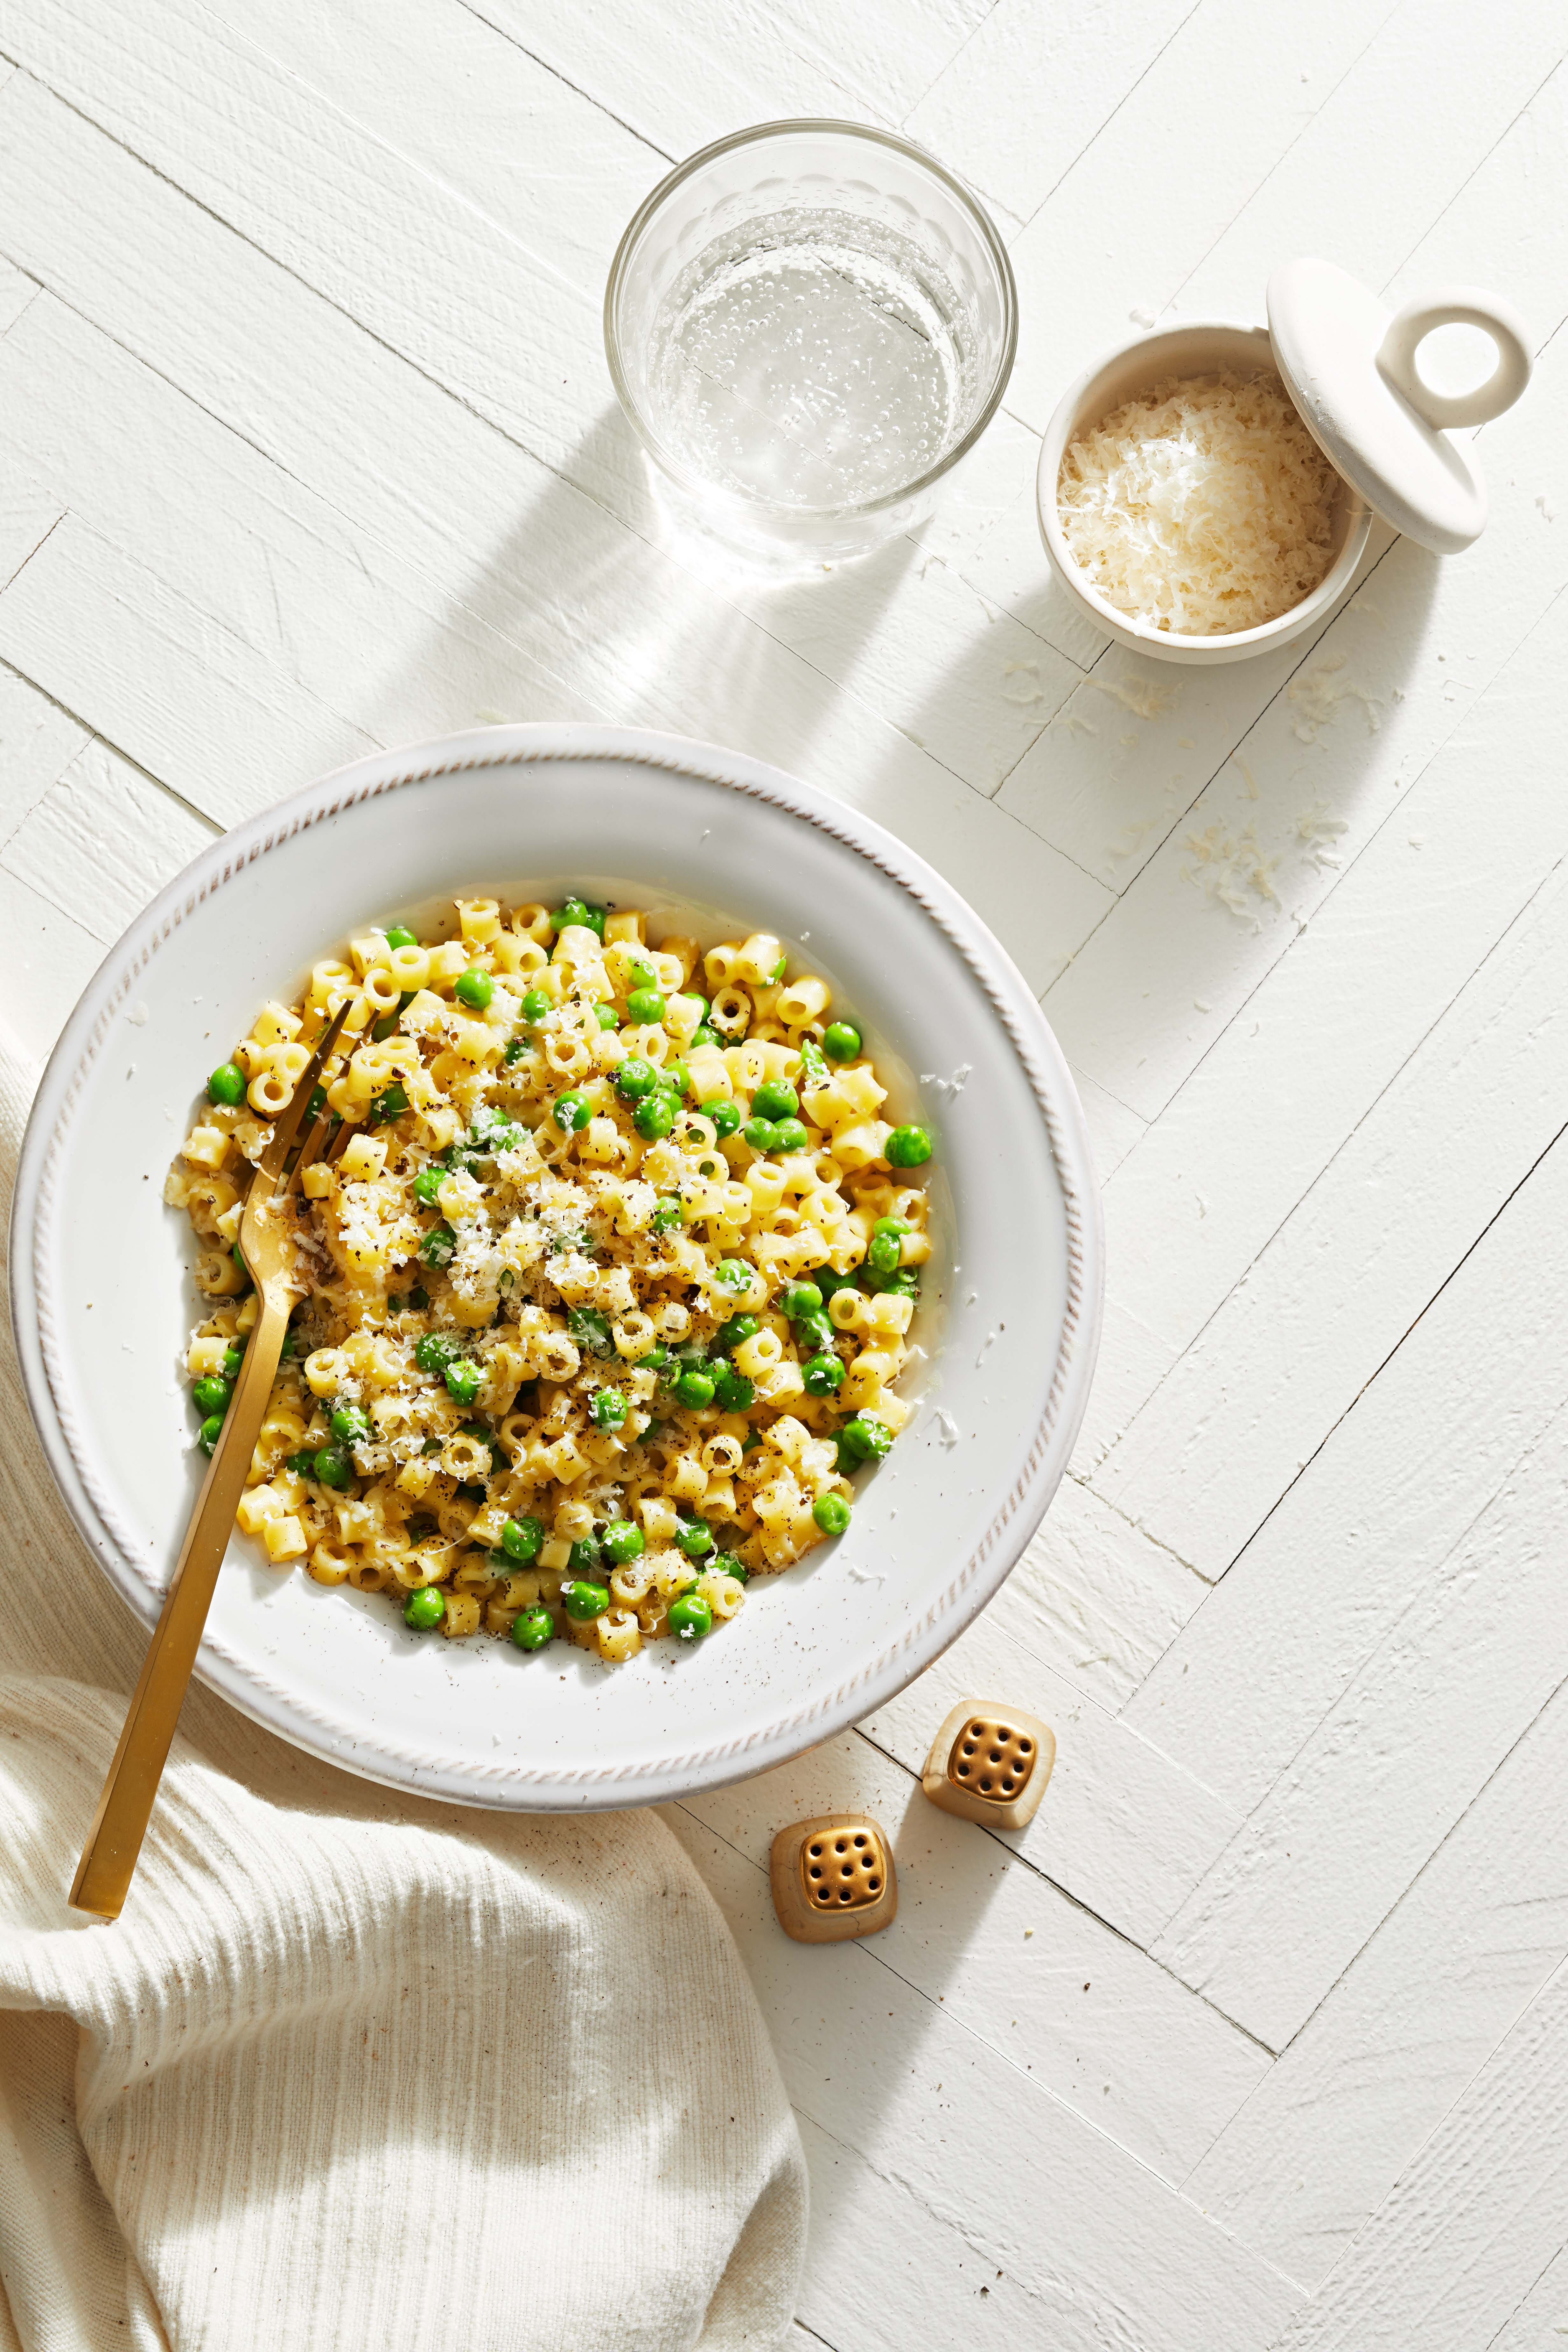 Our Top Recipe of the Month? Pasta e Piselli